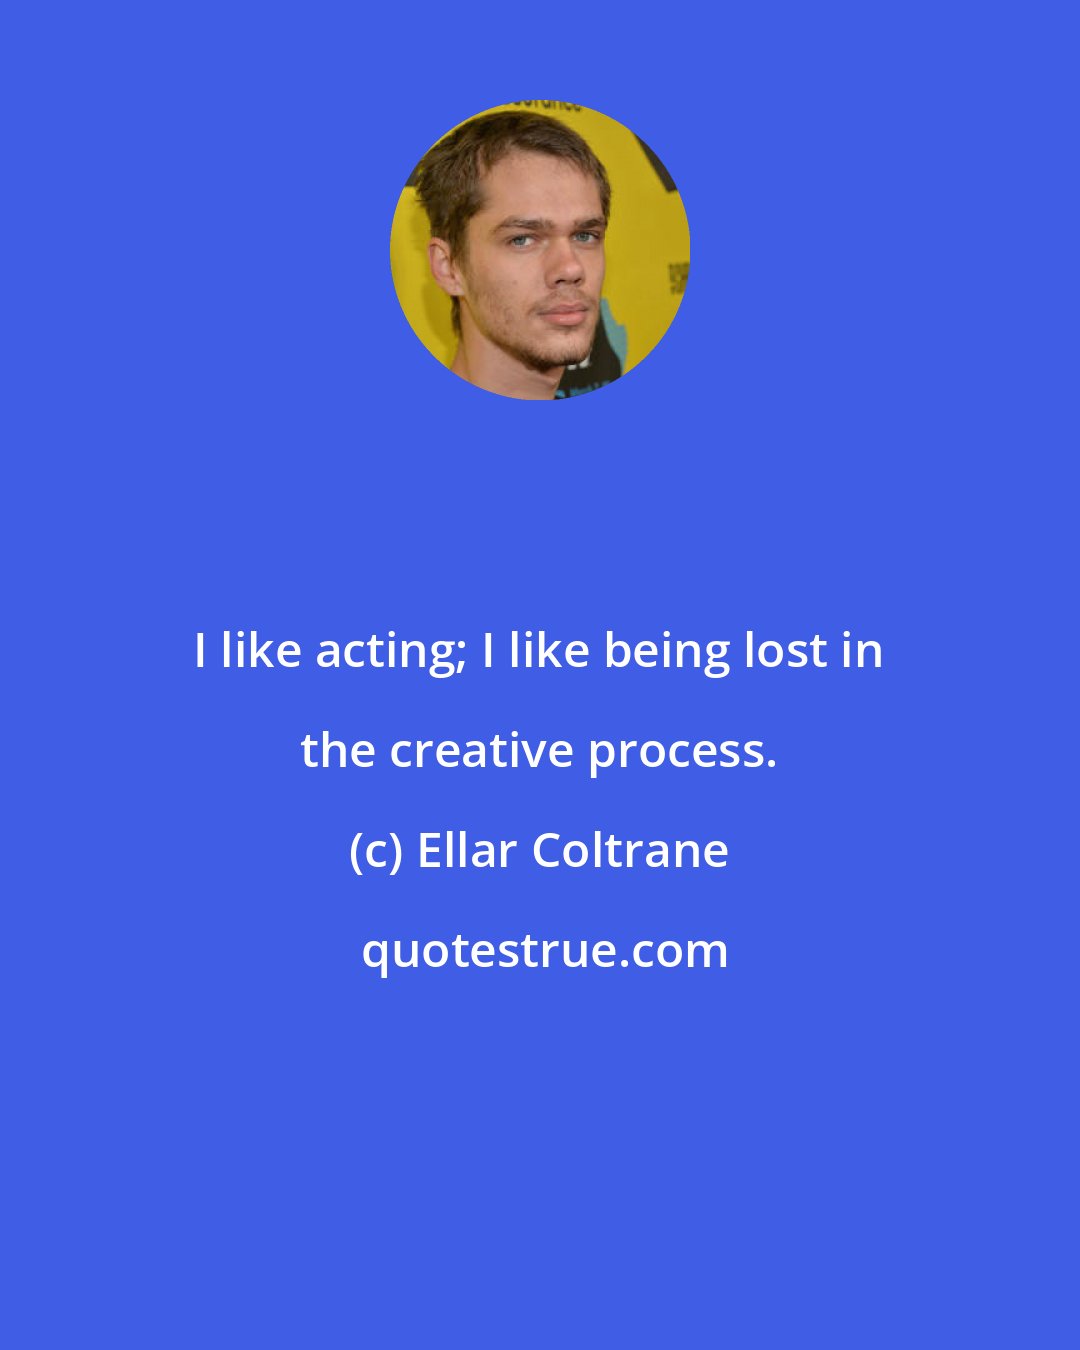 Ellar Coltrane: I like acting; I like being lost in the creative process.